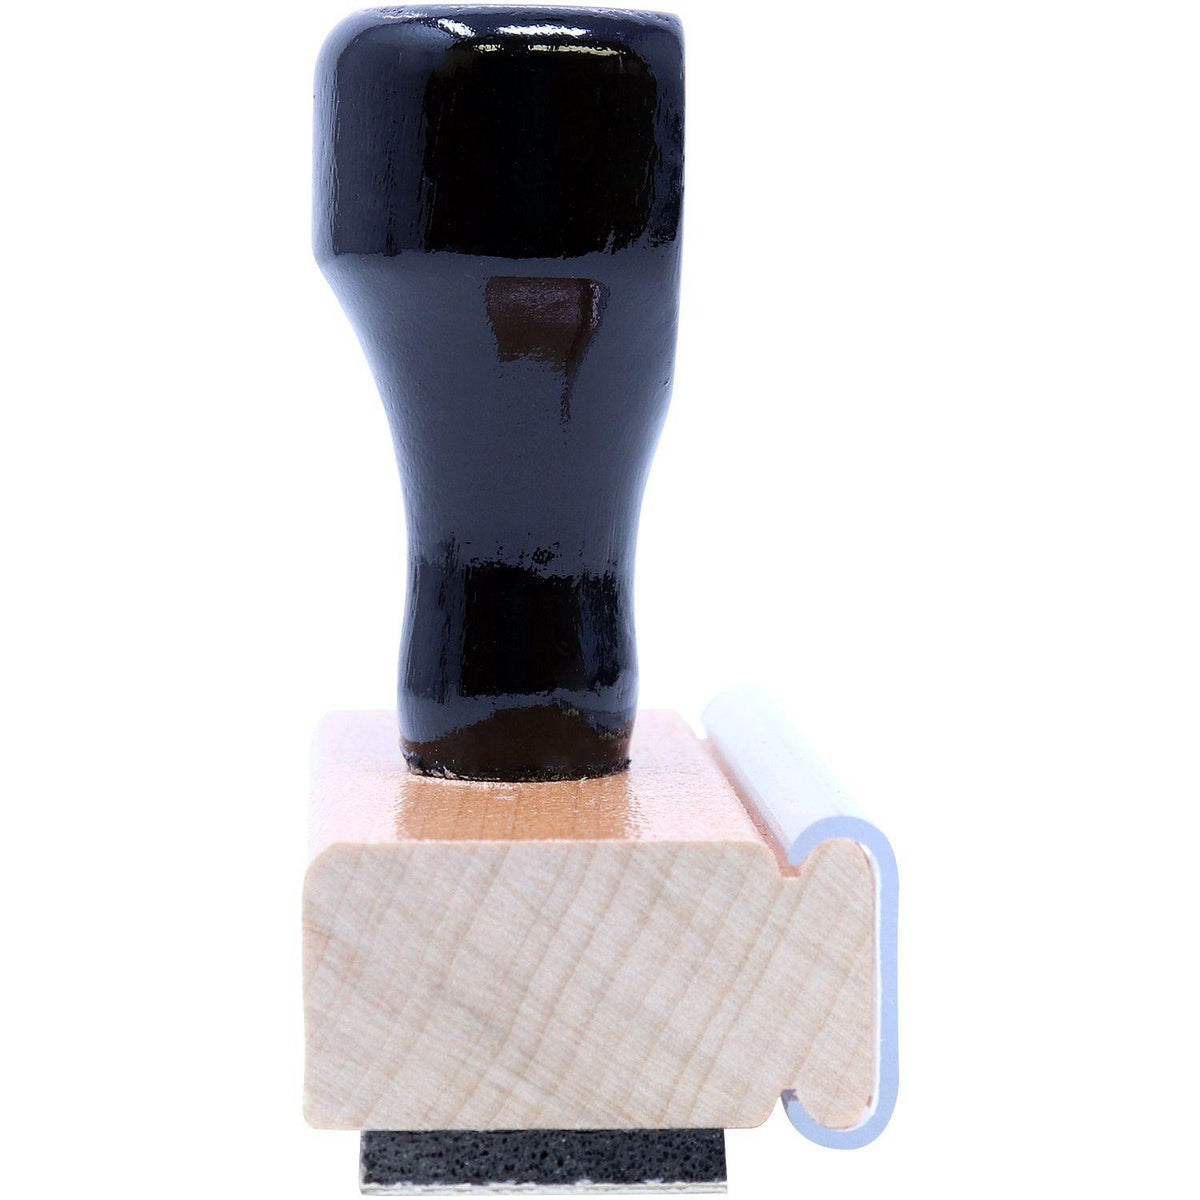 Side View of Large Borrador Rubber Stamp